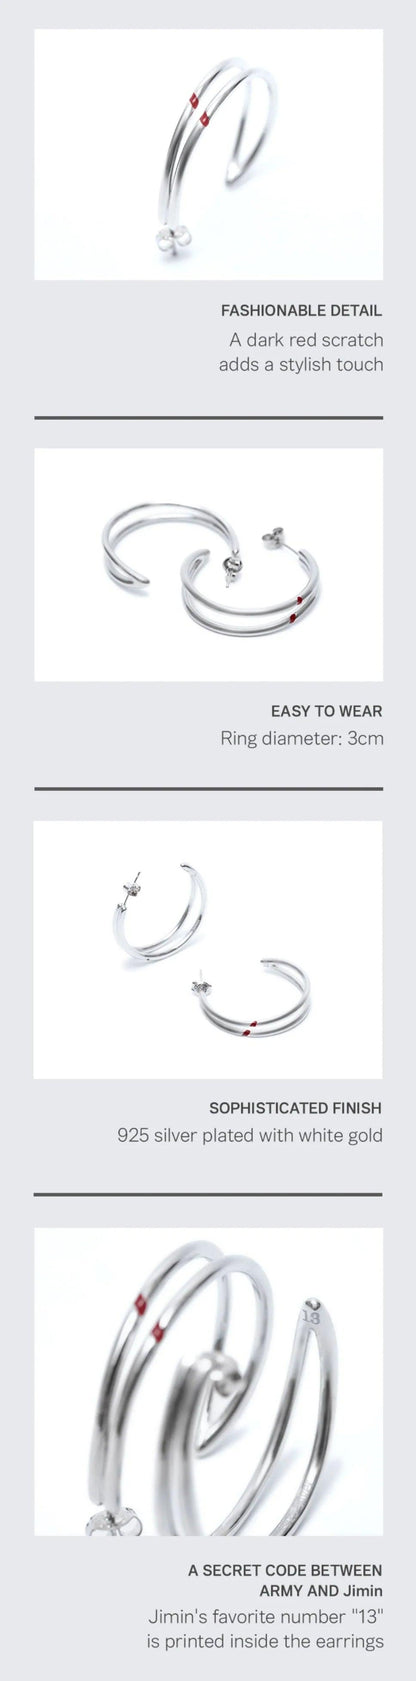 [2nd PRE ORDER] BTS - ARTIST-MADE COLLECTION by JIMIN - RED CARVING EARRING - KAEPJJANG SHOP (캡짱 숍)